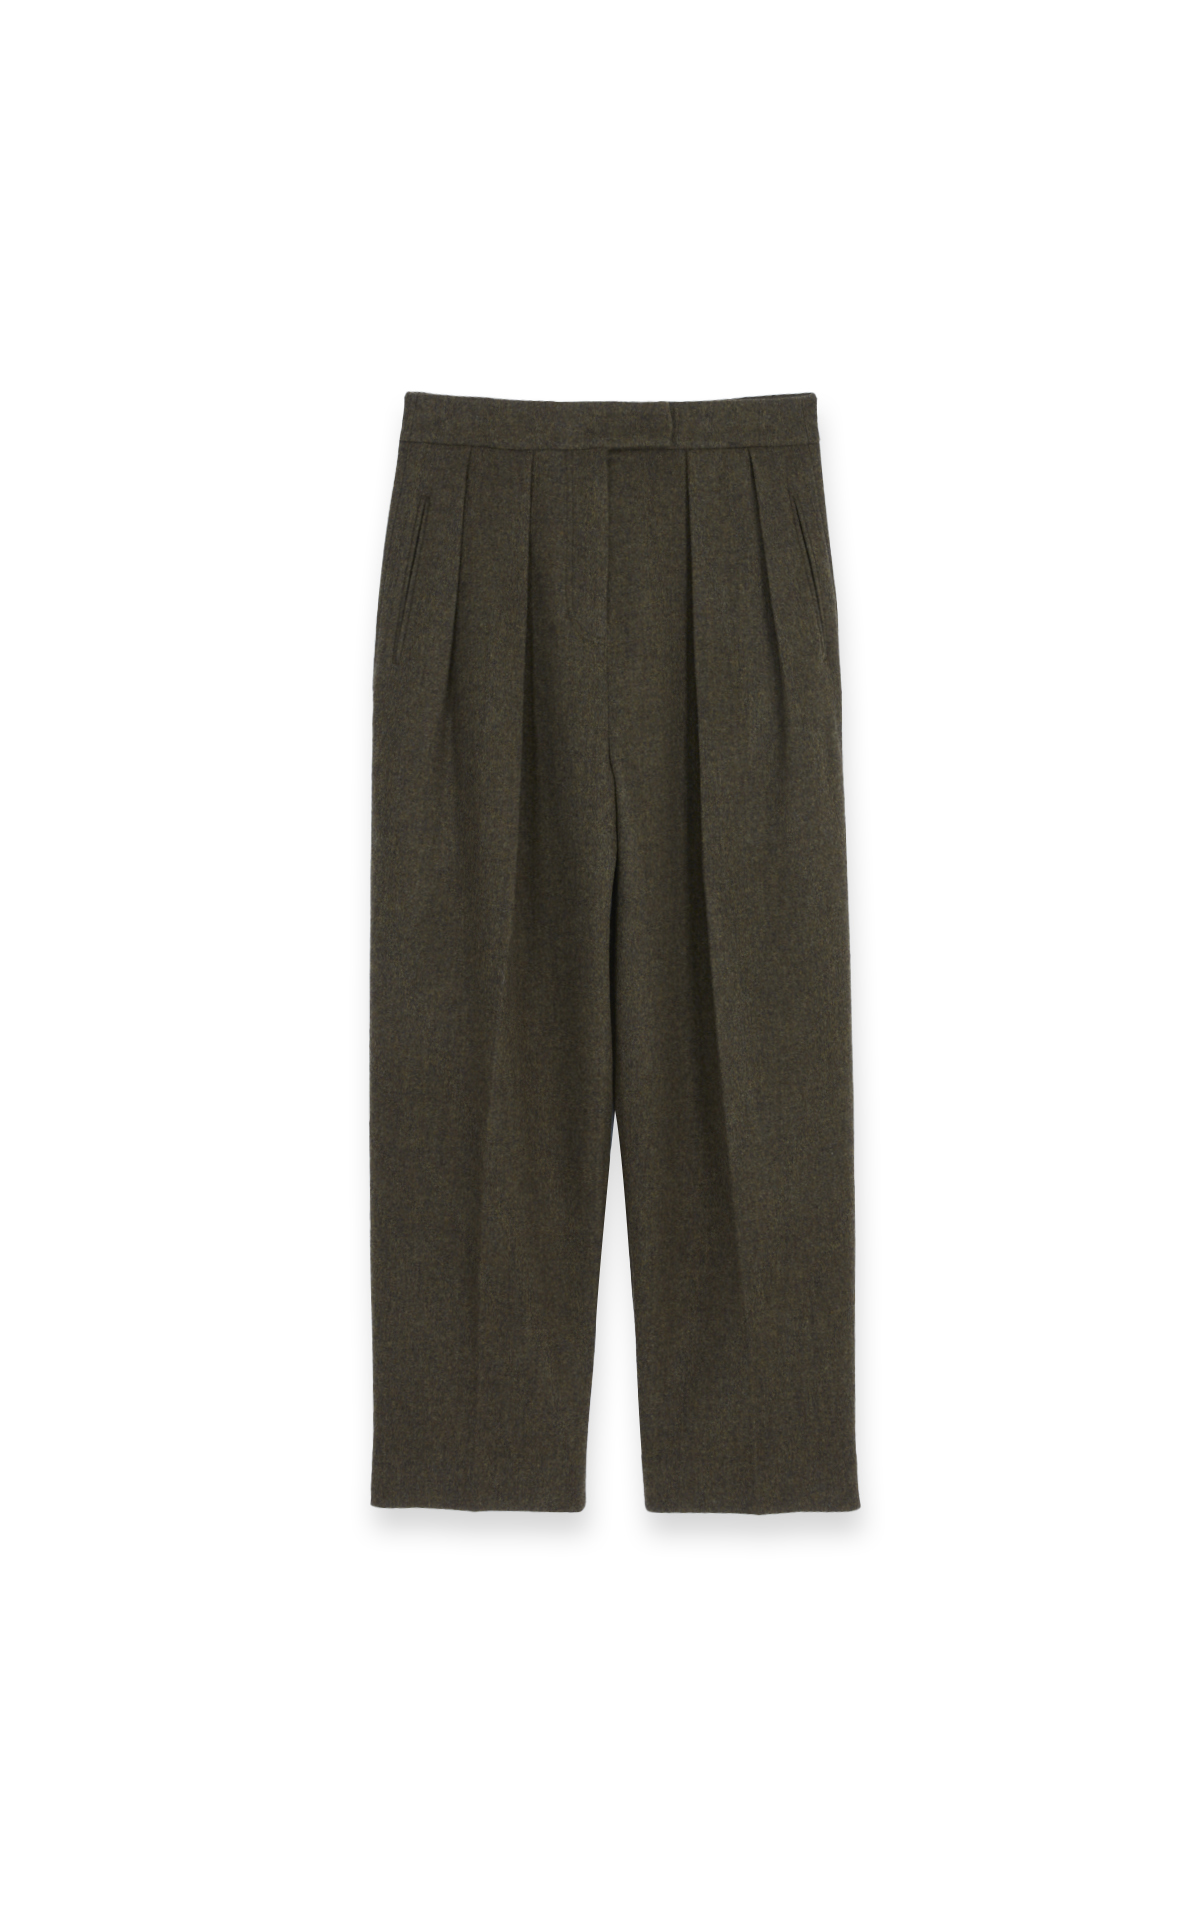 Cashmere straight cut trousers*